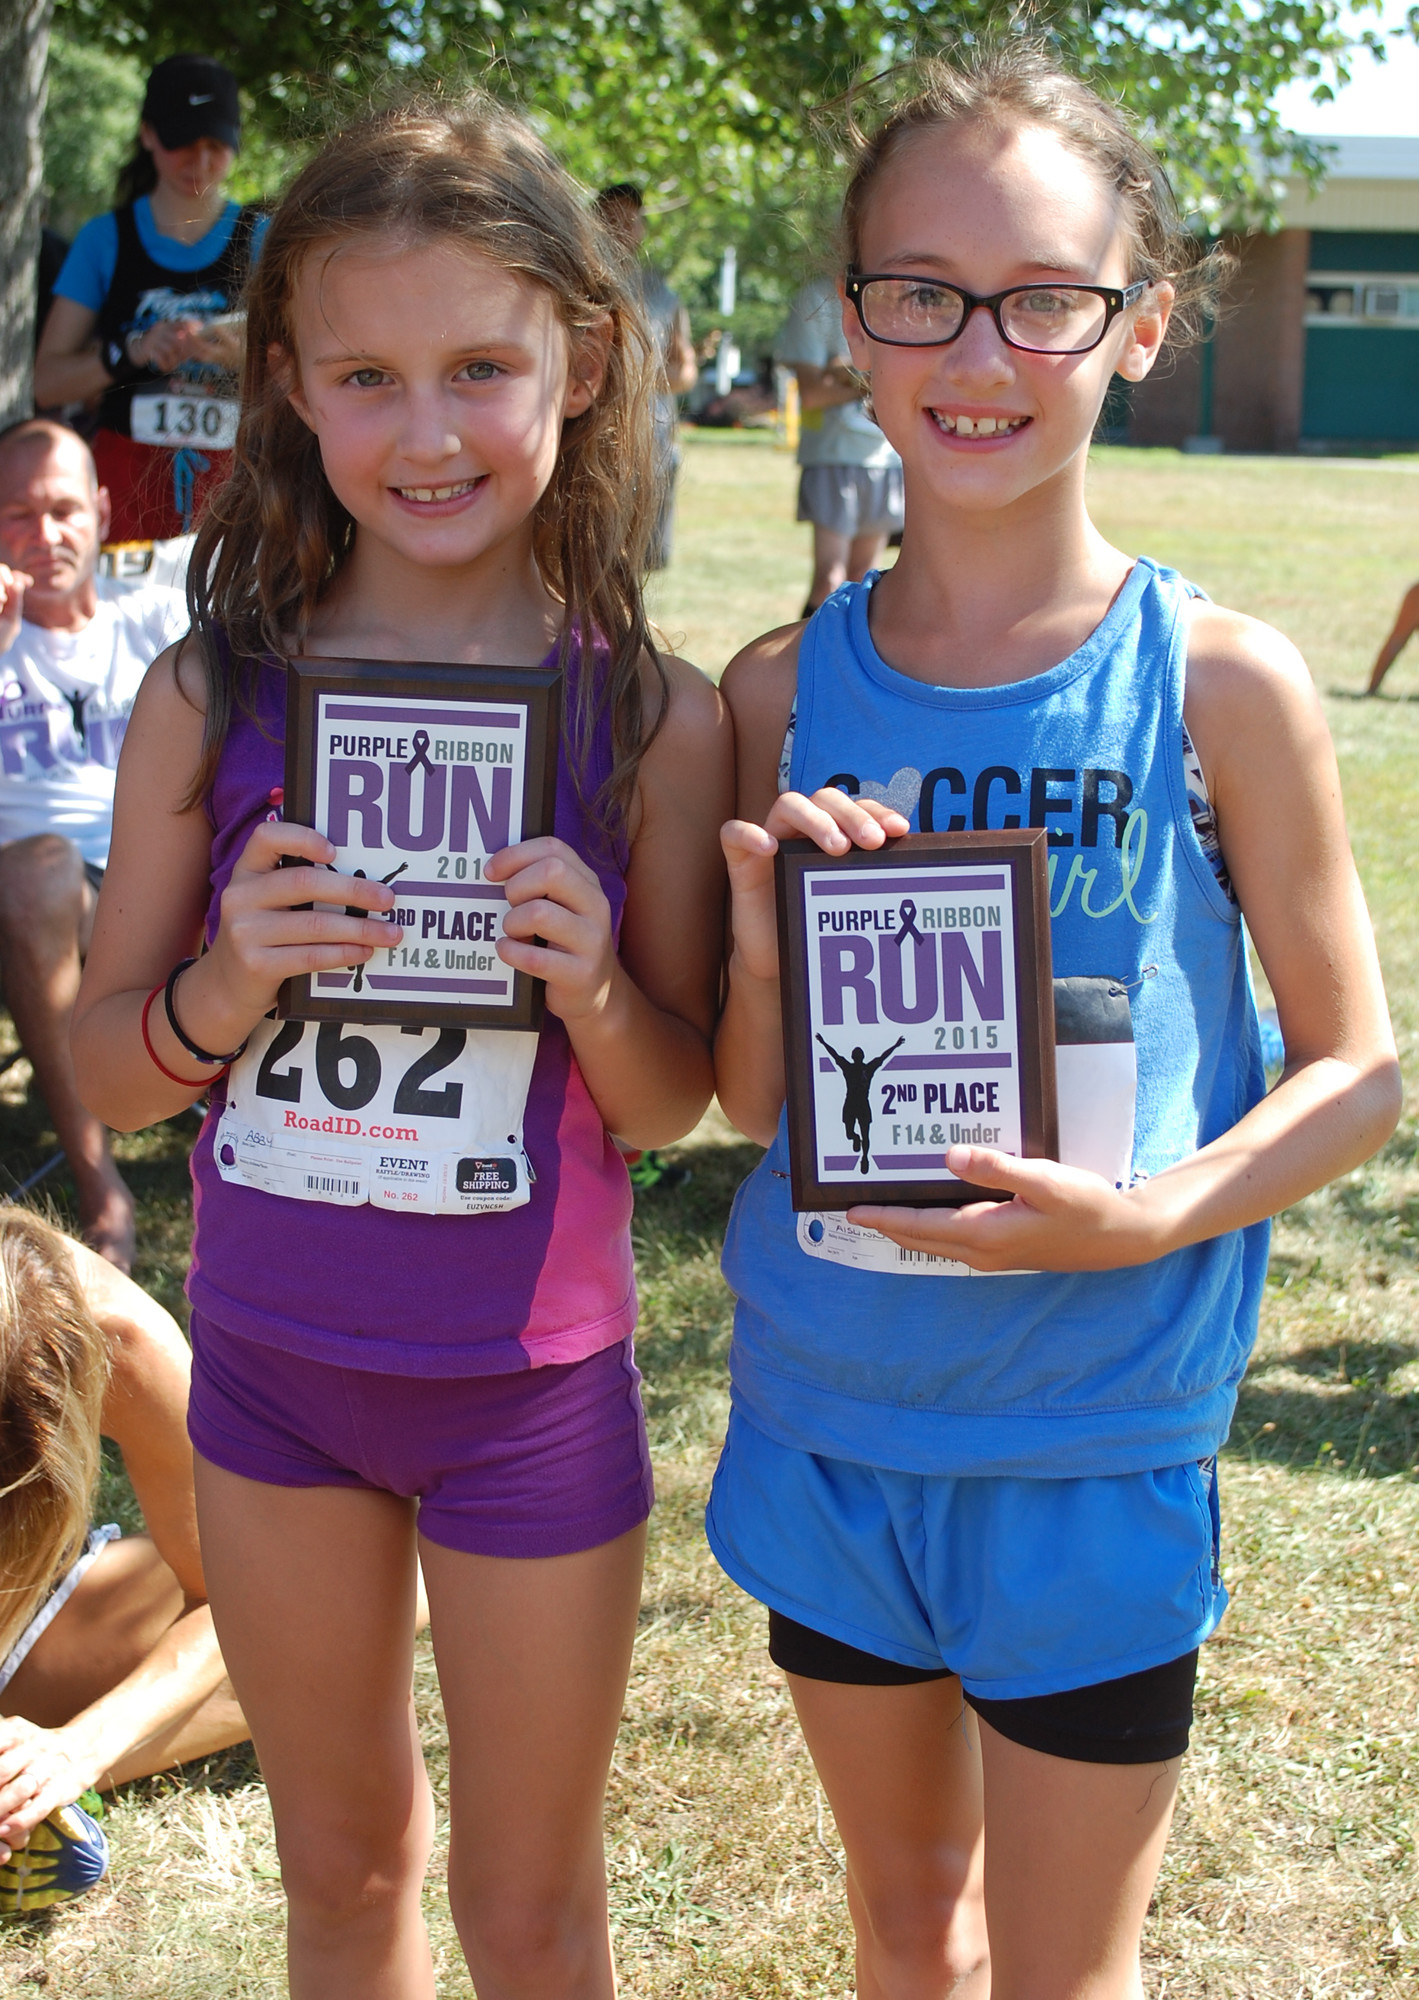 Sisters Abby and Aislinn Frazer, from Wantagh, finished third and second, respectively, among girls in the 14-and-under age group.